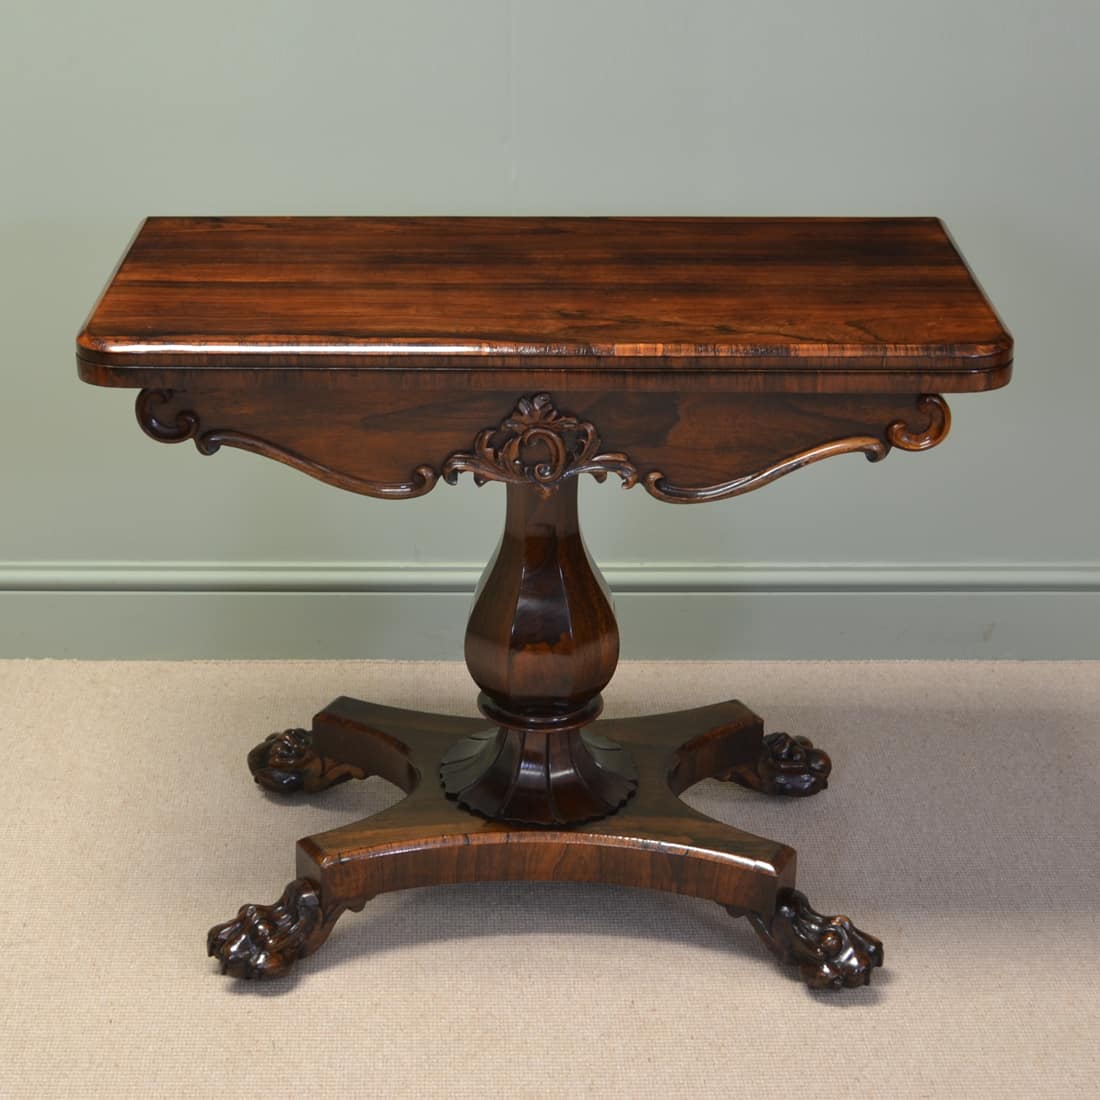 Striking Rosewood Regency Antique Games / Card Table with Lion Paw Feet